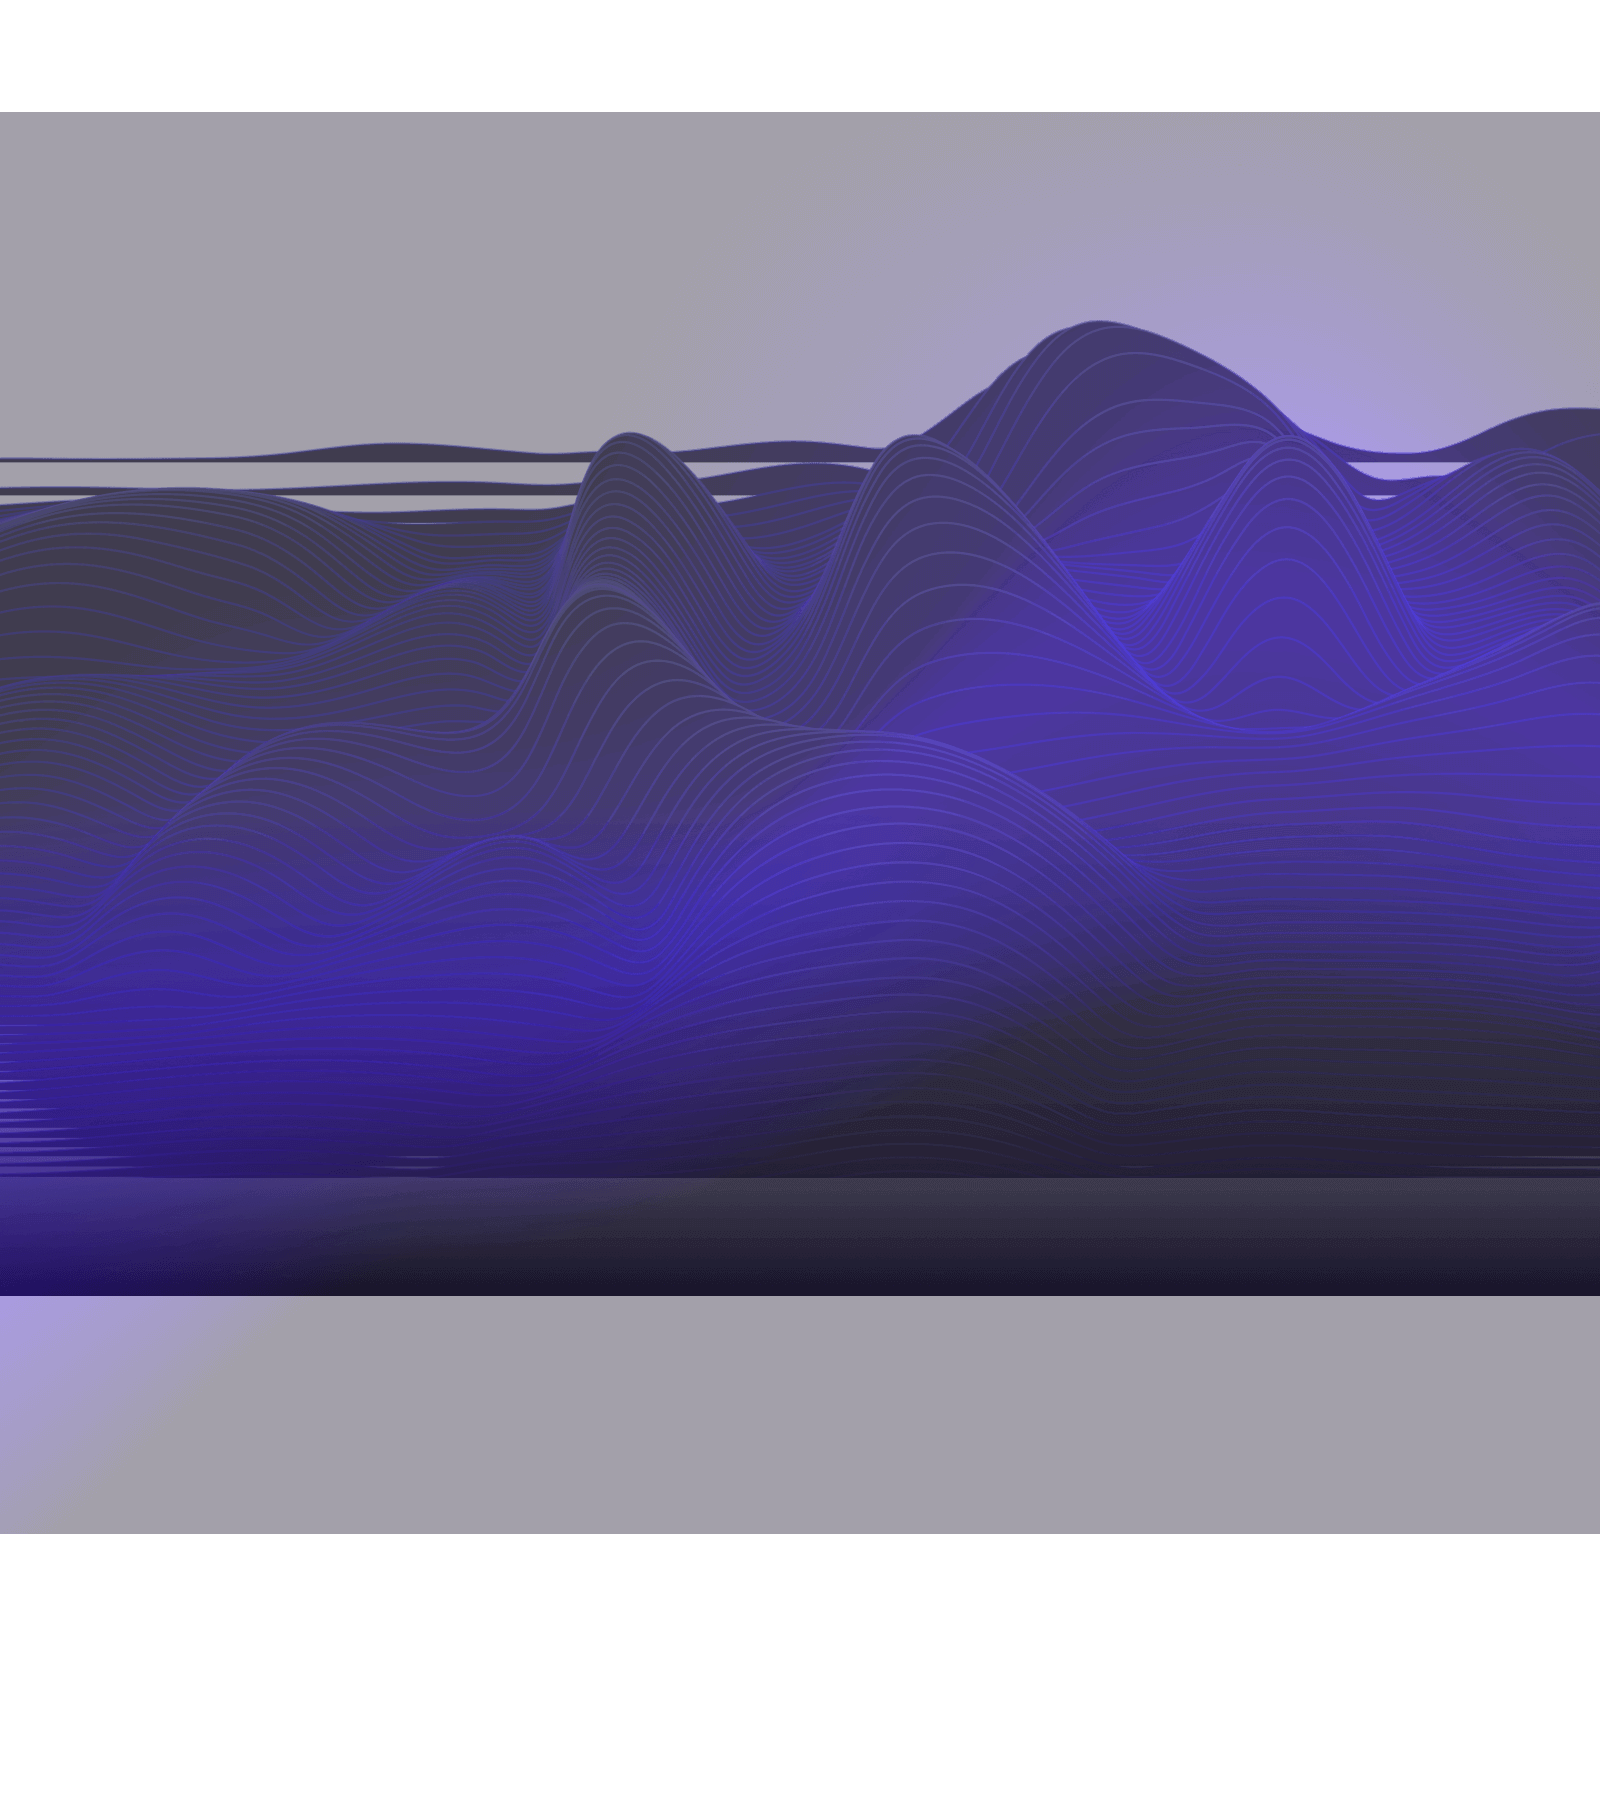 A blue background containing curved lines elements